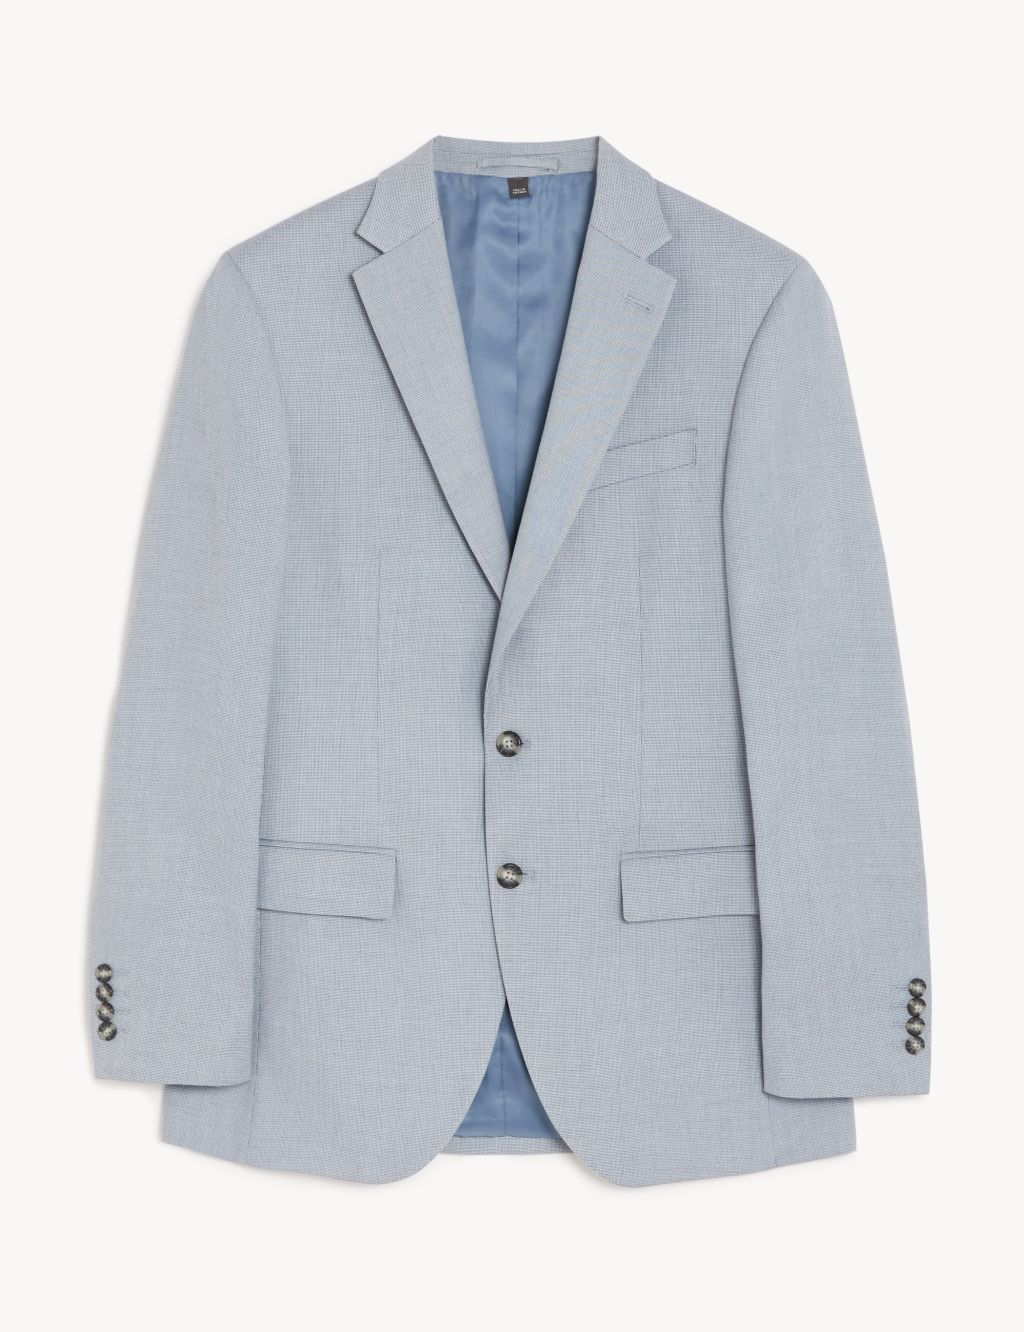 Slim Fit Micro Puppytooth Suit Jacket image 2